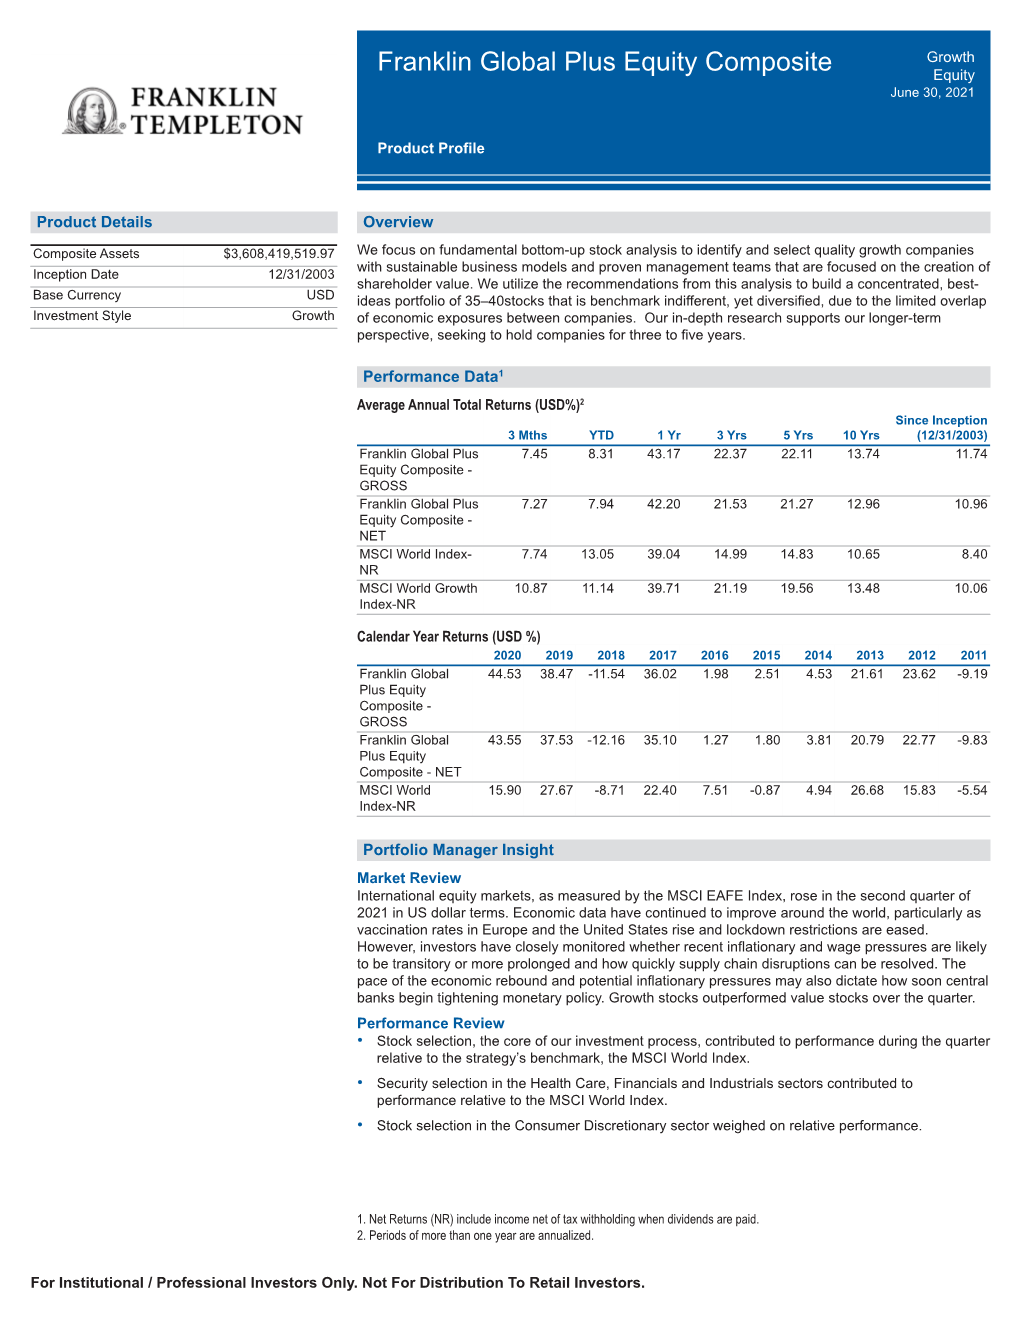 Franklin Global Plus Equity Composite Equity June 30, 2021